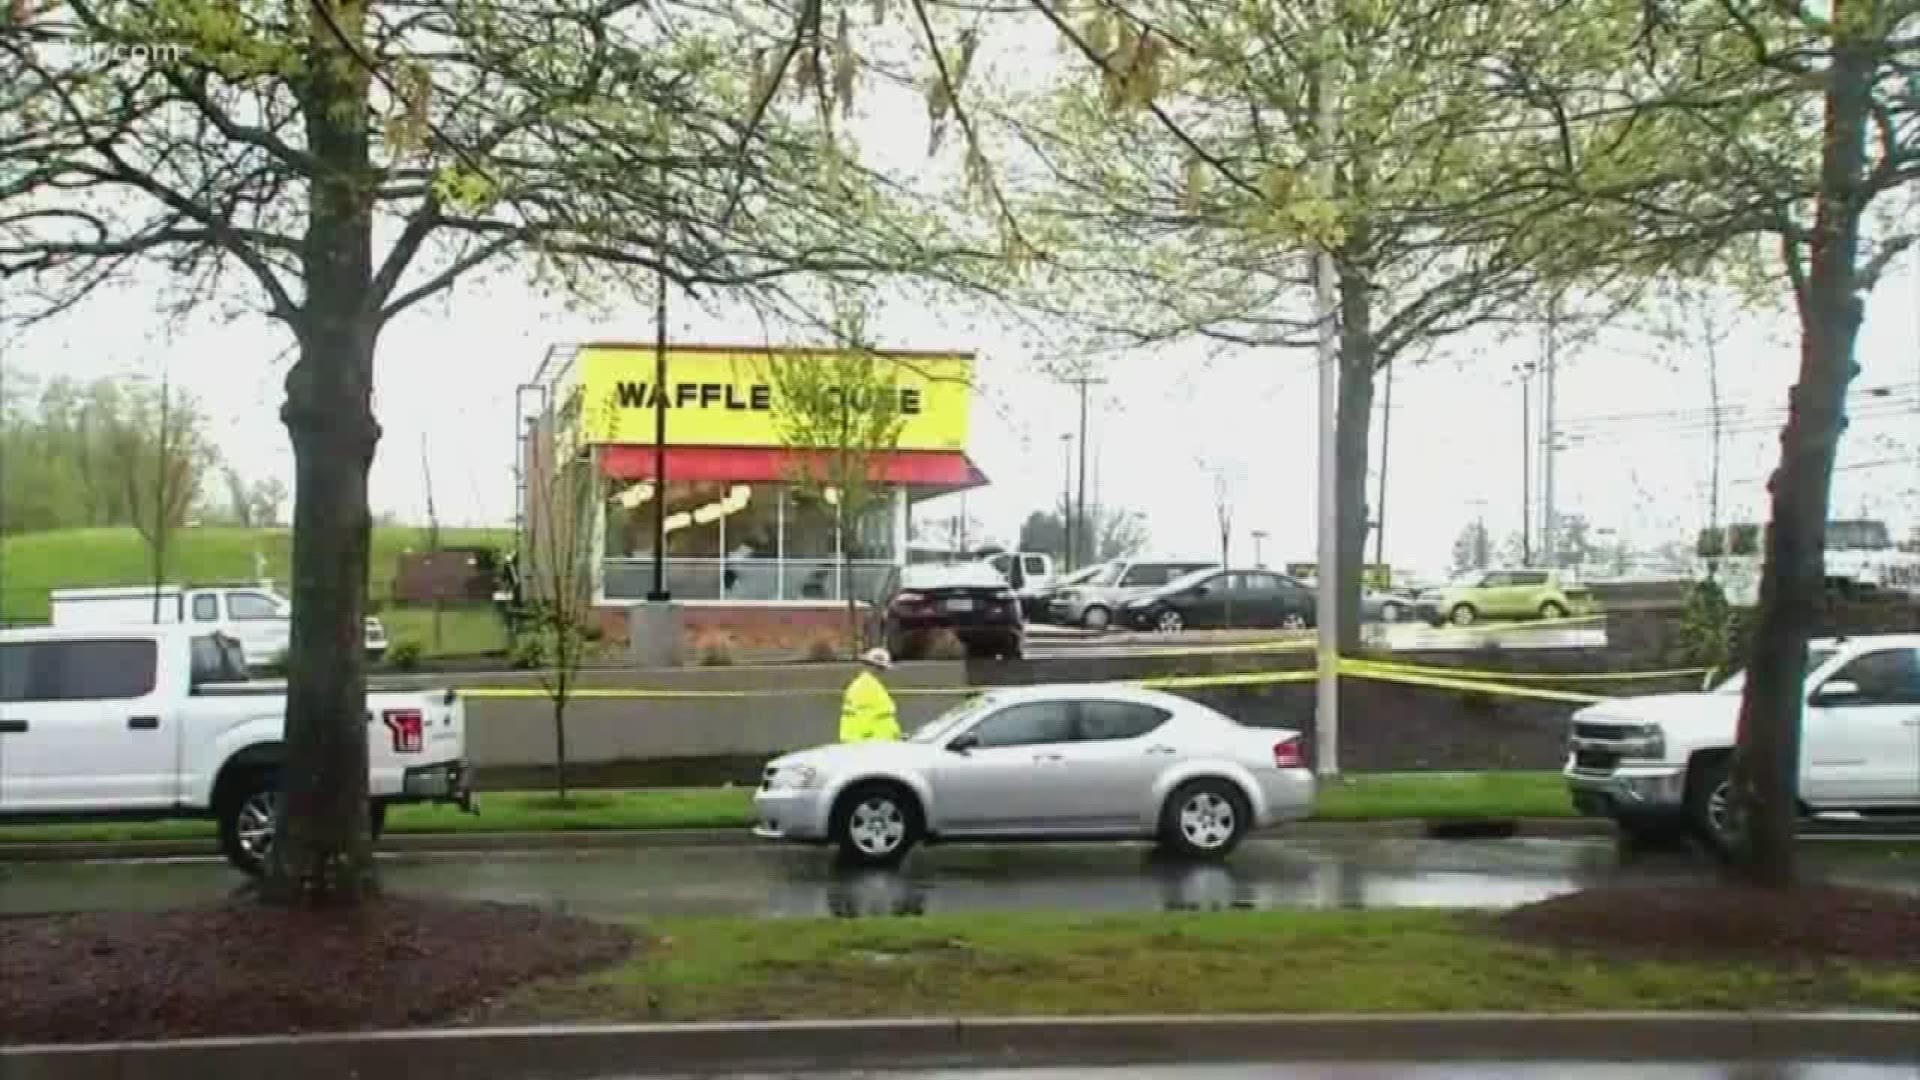 April 24, 2018: The man arrested in the deadly shooting of 4 people at a Middle Tennessee Waffle House now faces more charges.